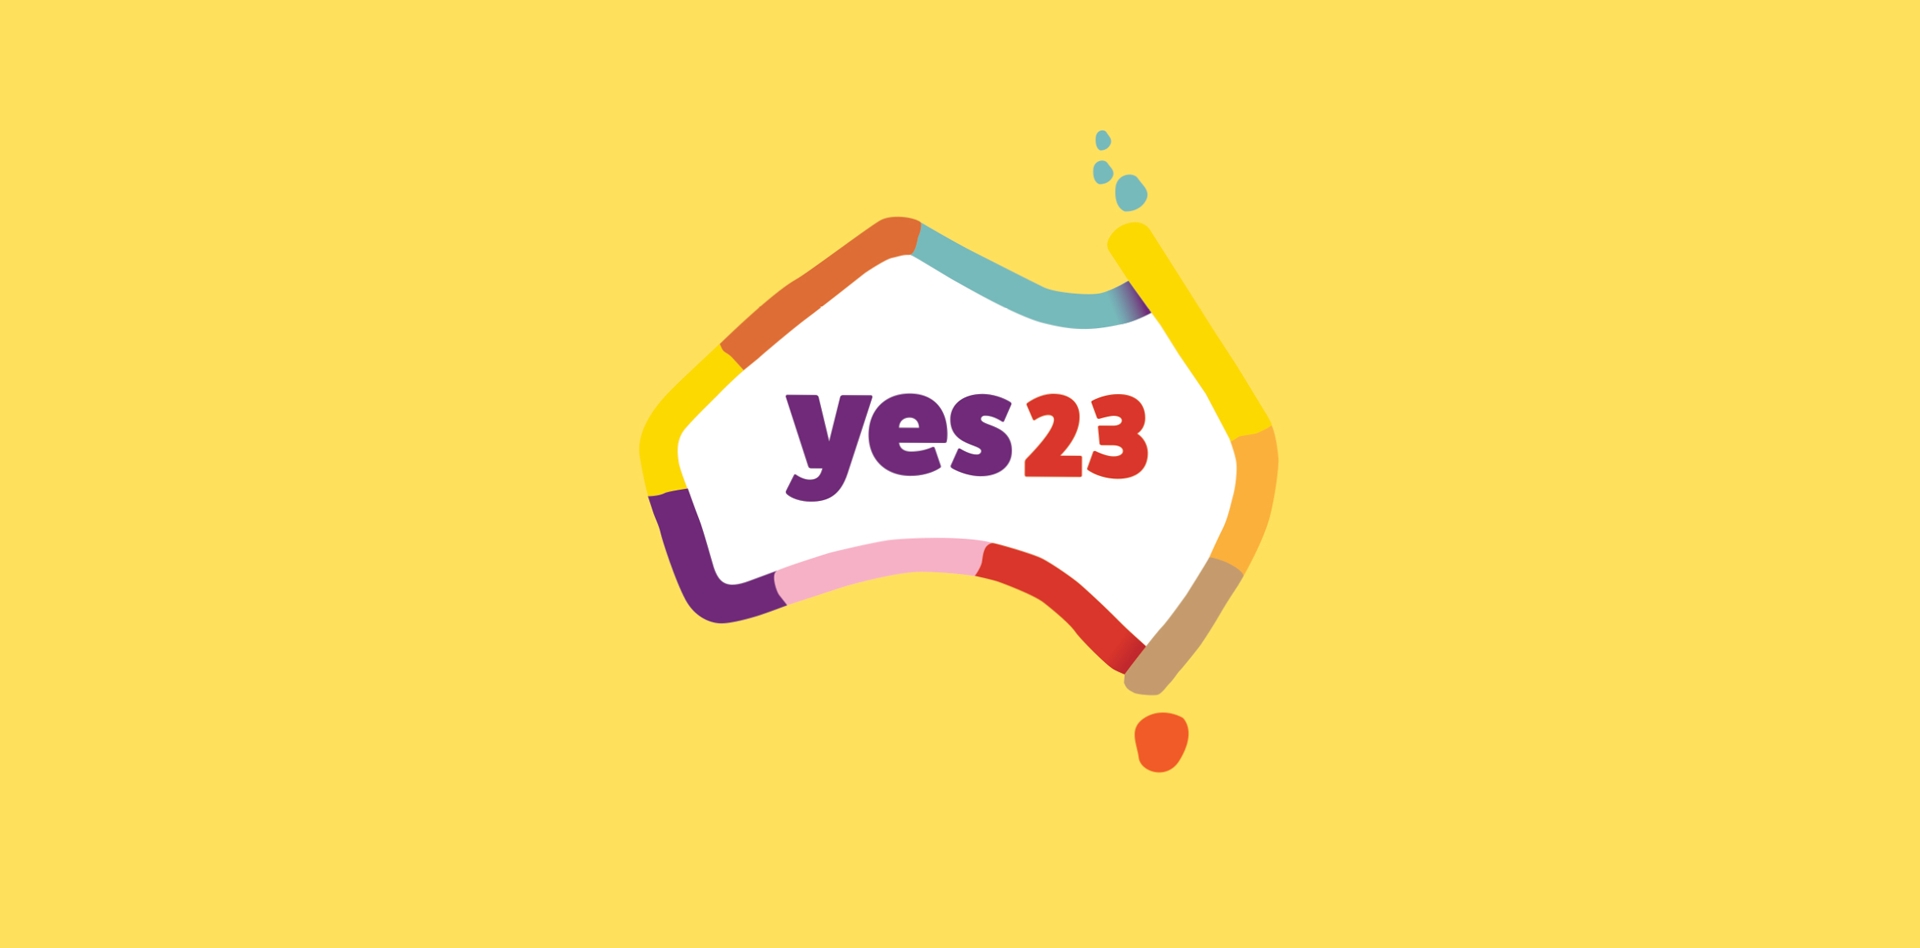 A vibrant logo displaying the word "yes 23" in various colors.